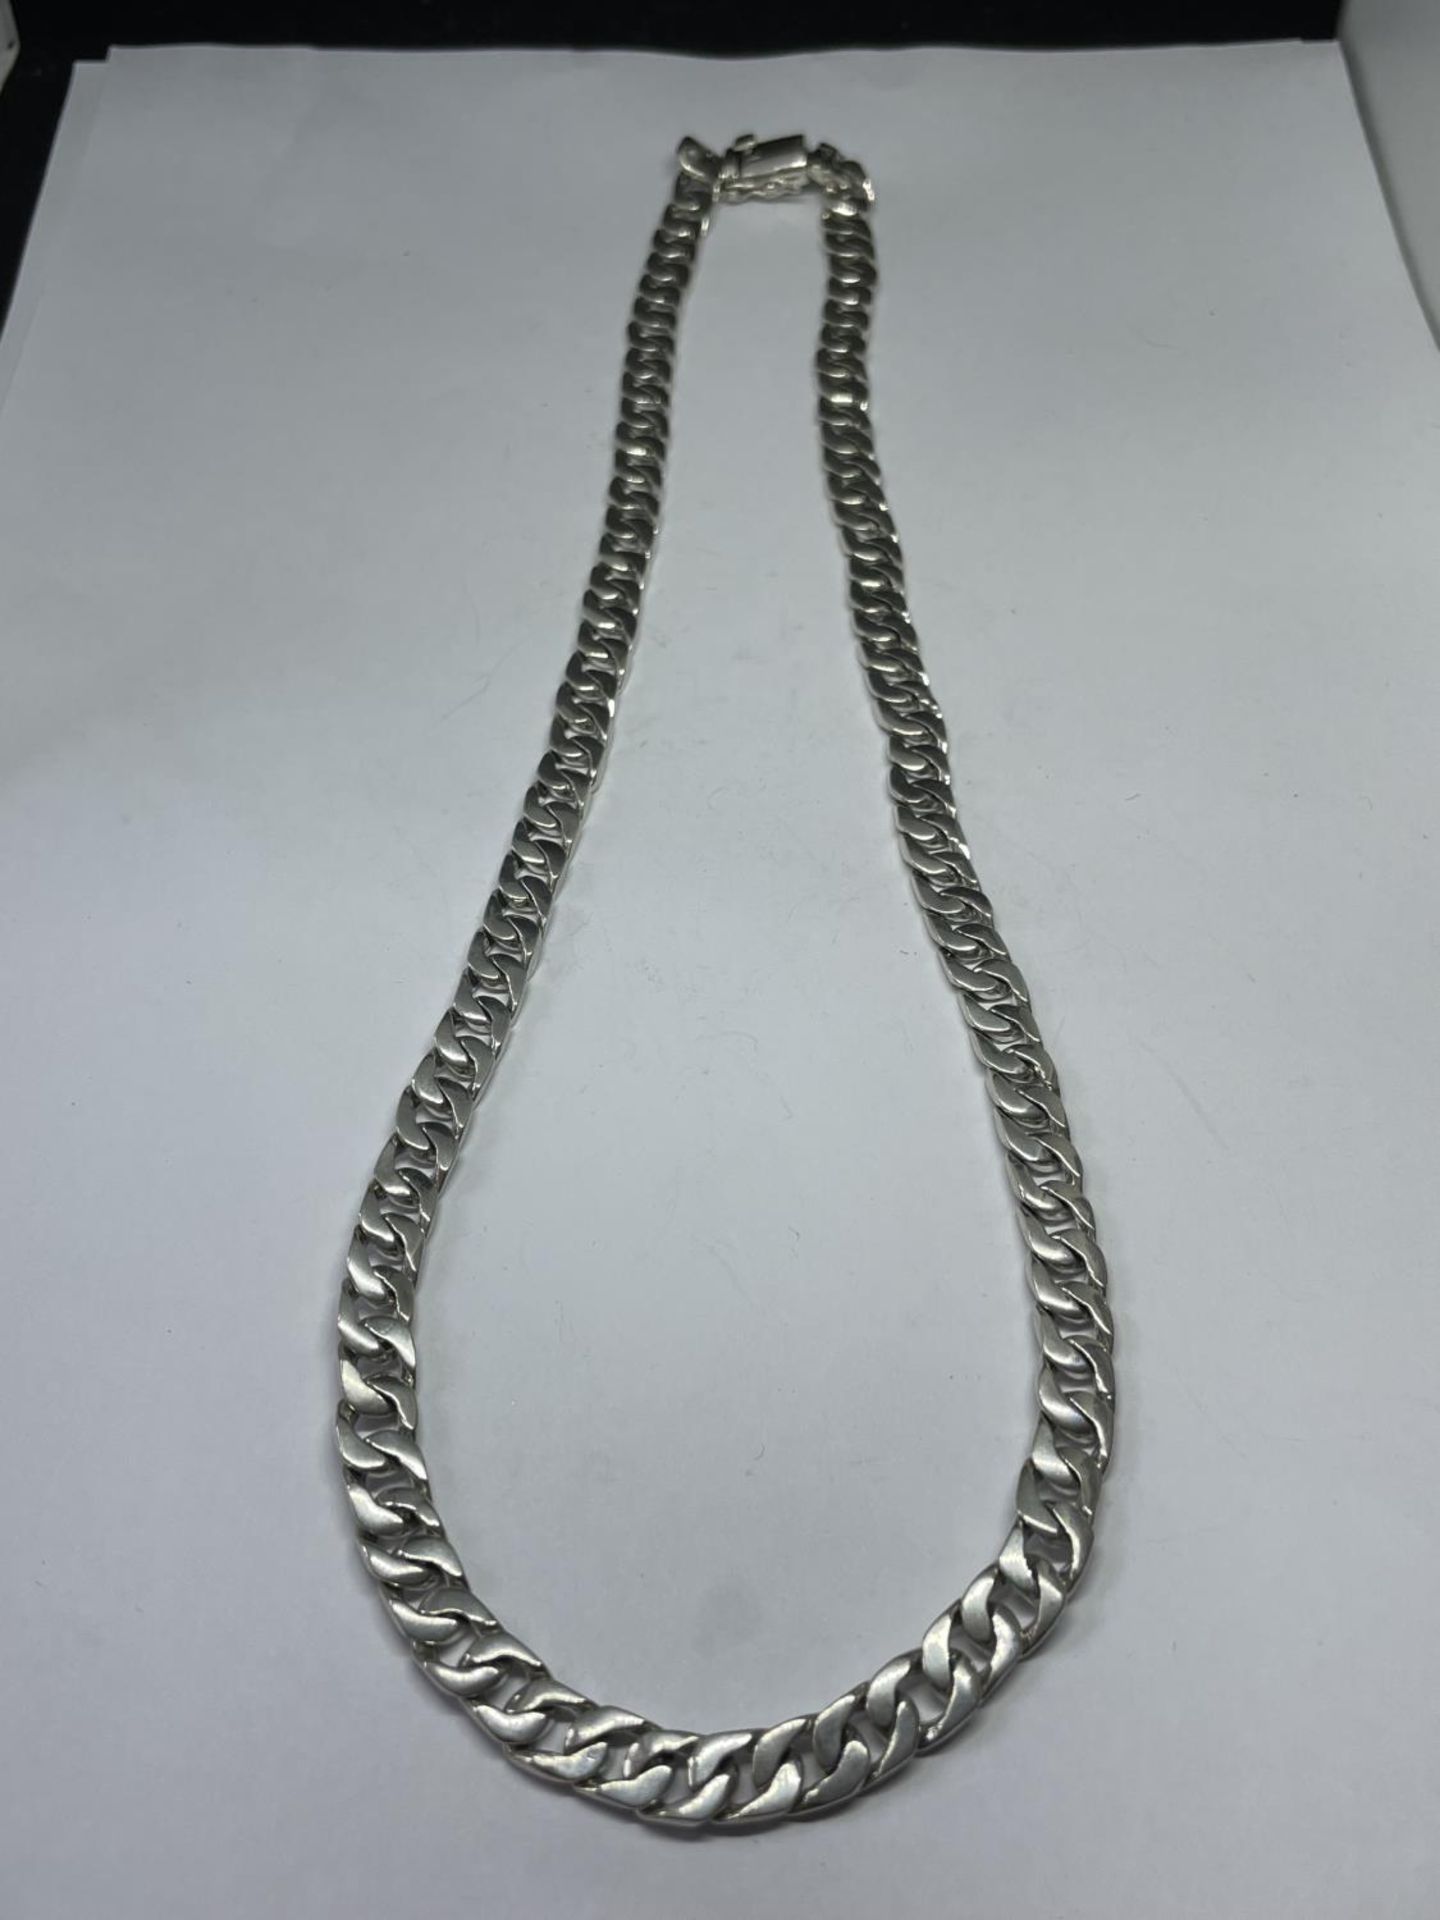 A HEAVY MARKED SILVER NECKLACE LENGTH 22 INCHES